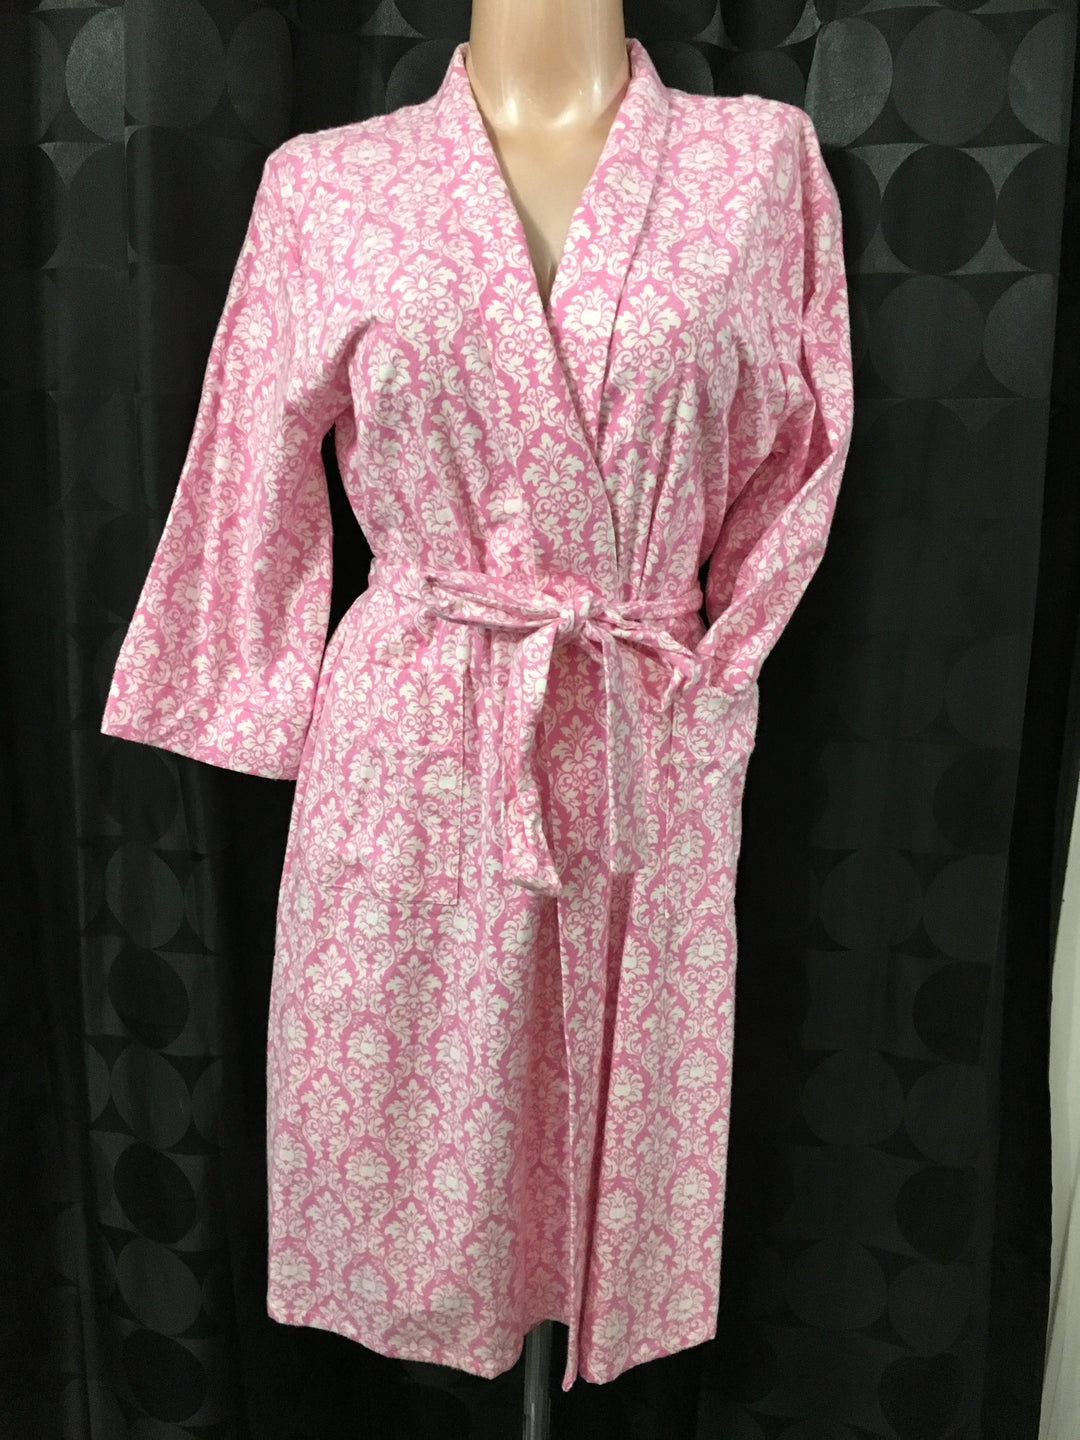 Floral Robe - Size Large